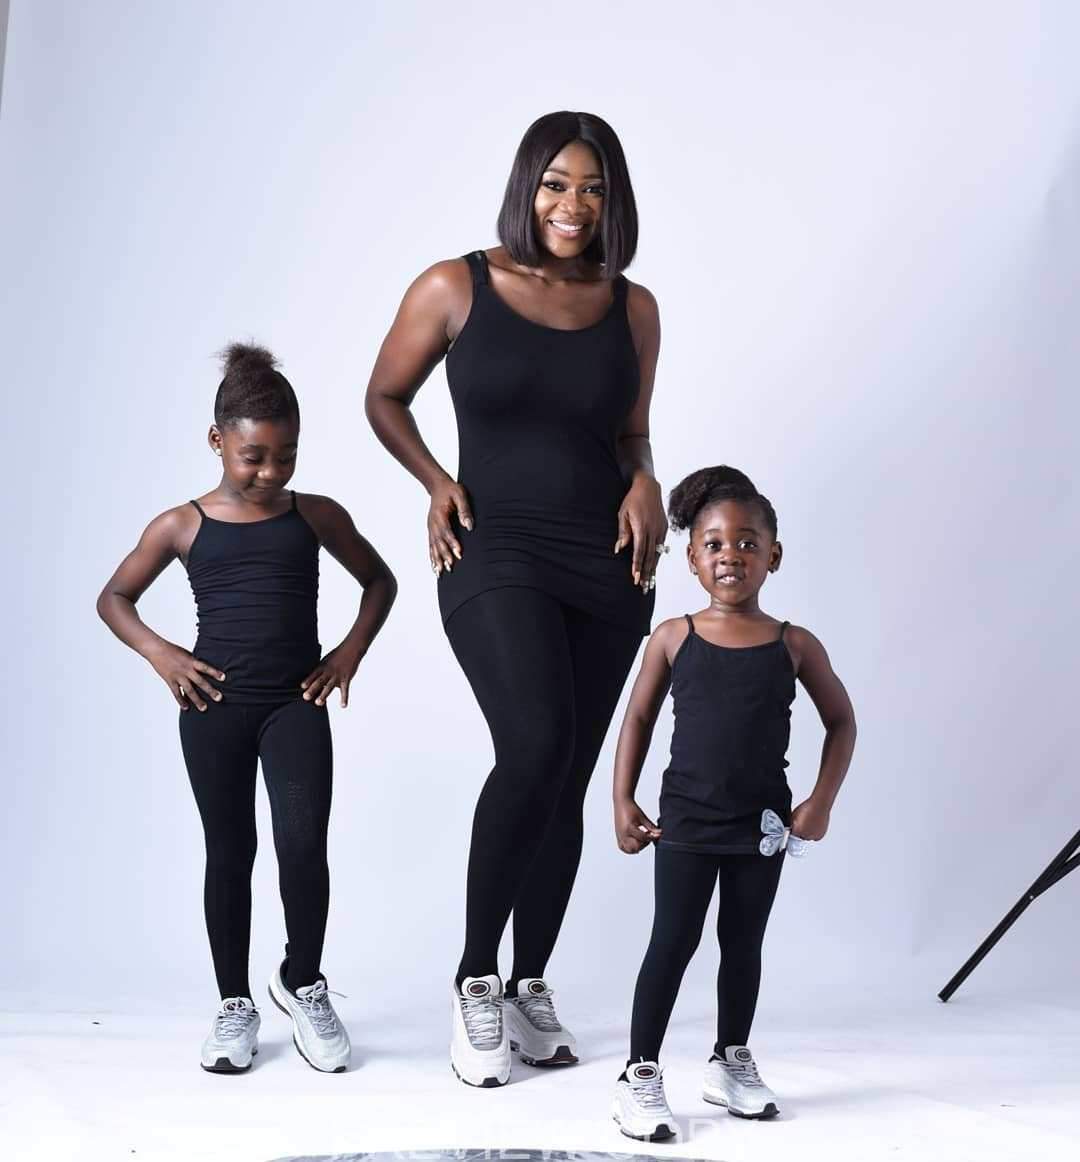 My biggest fear is not being alive to take care of my kids - Mercy Johnson